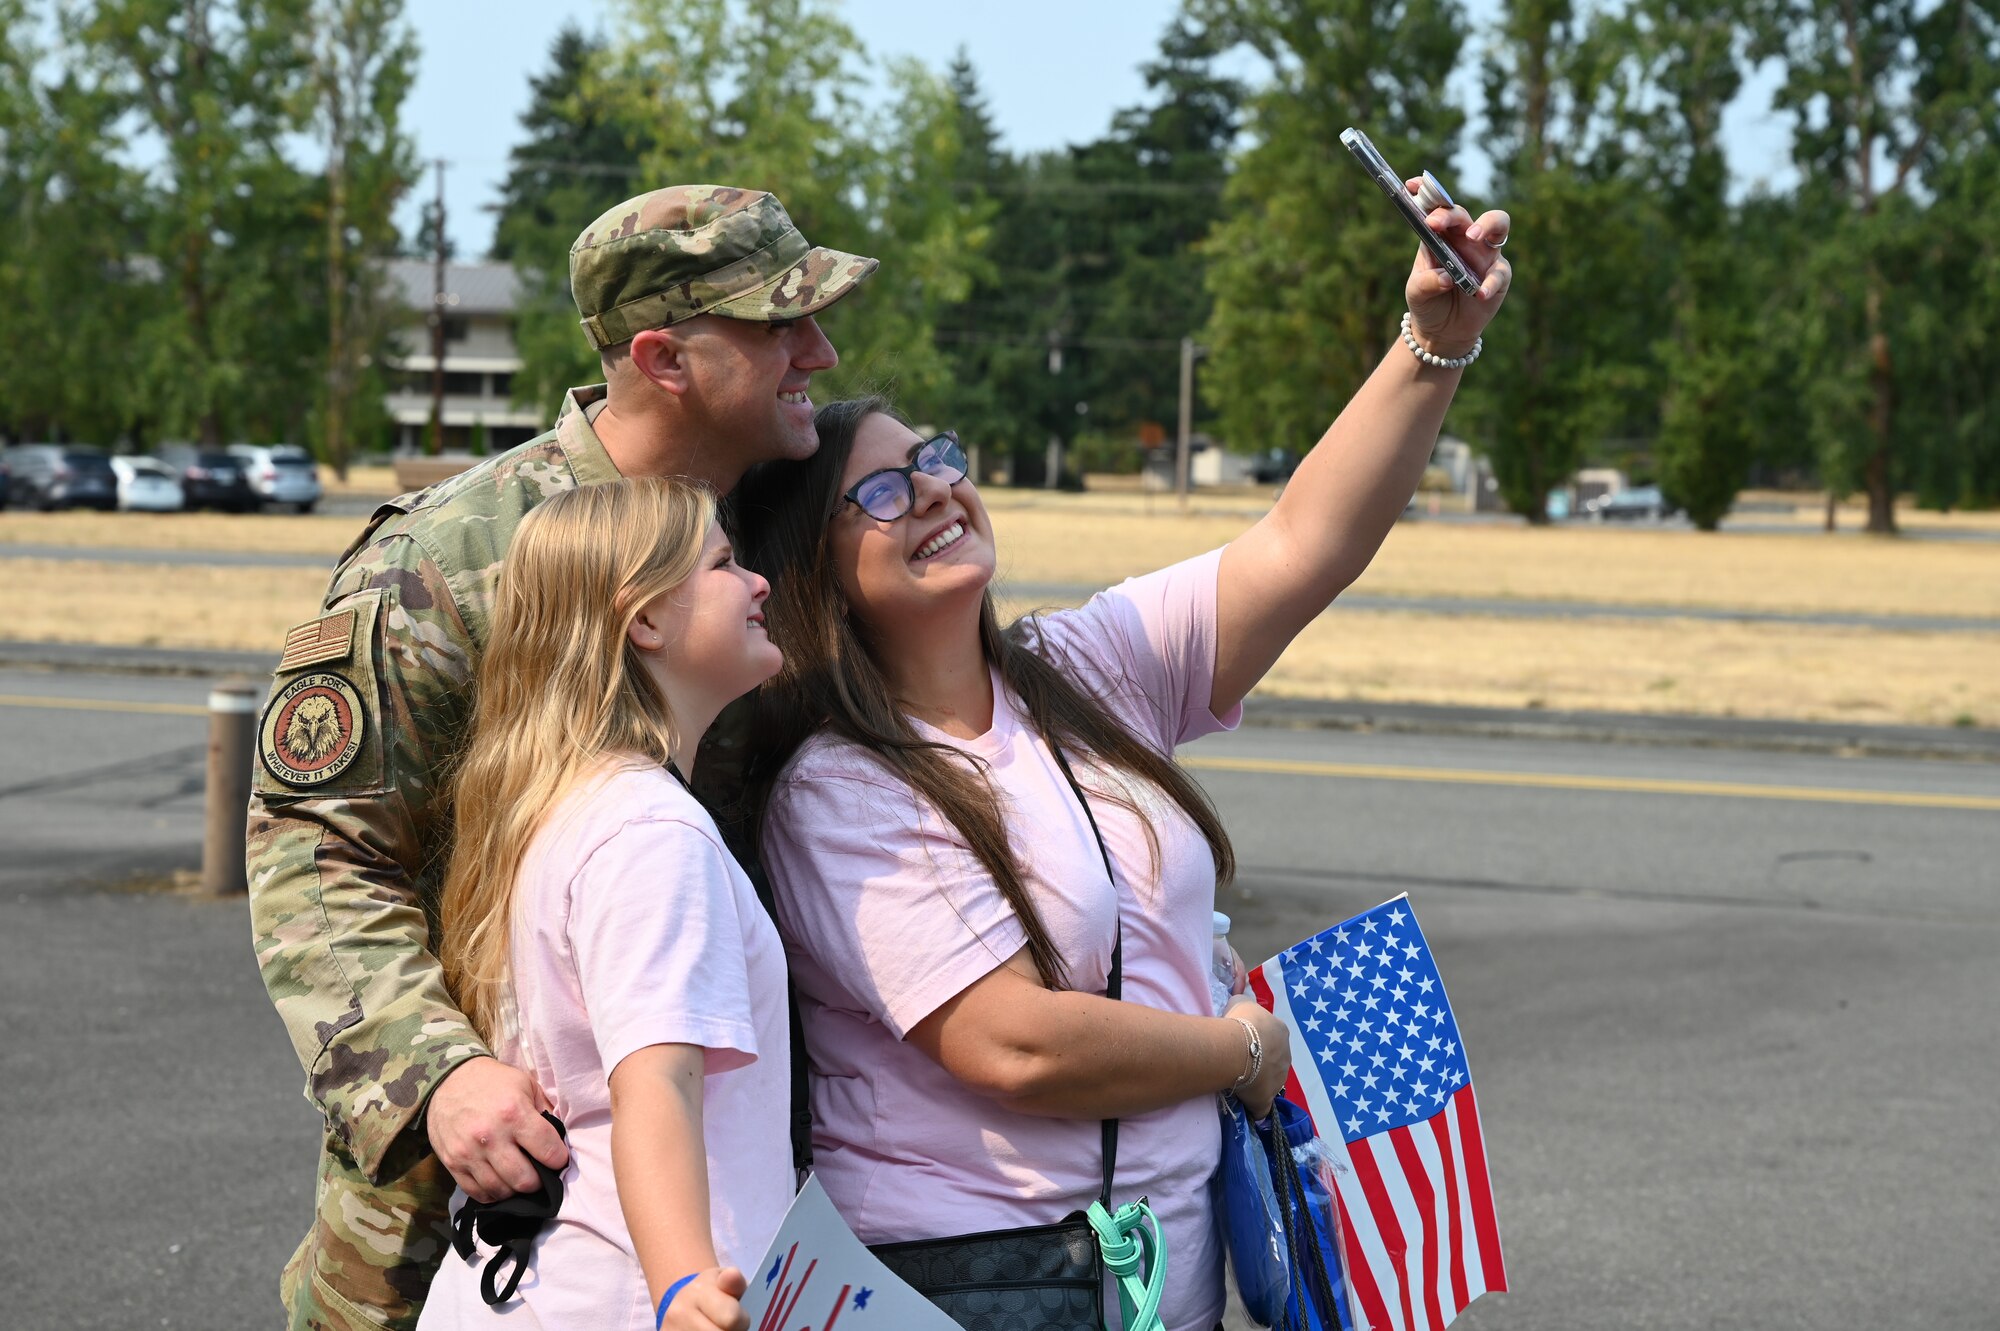 U.S. Air Force Senior Master Sgt. James Wall, 62nd APS senior enlisted leader, and his family, Christina and Leah, pose for a photo during Operation Kids Understanding Deployment Operations (KUDOs) at Joint Base Lewis-McChord, Washington, Aug. 14, 2021. More than 90 children, ages 4 to 14, participated in the mock deployment. (U.S. Air Force photo by Master Sgt. Julius Delos Reyes)